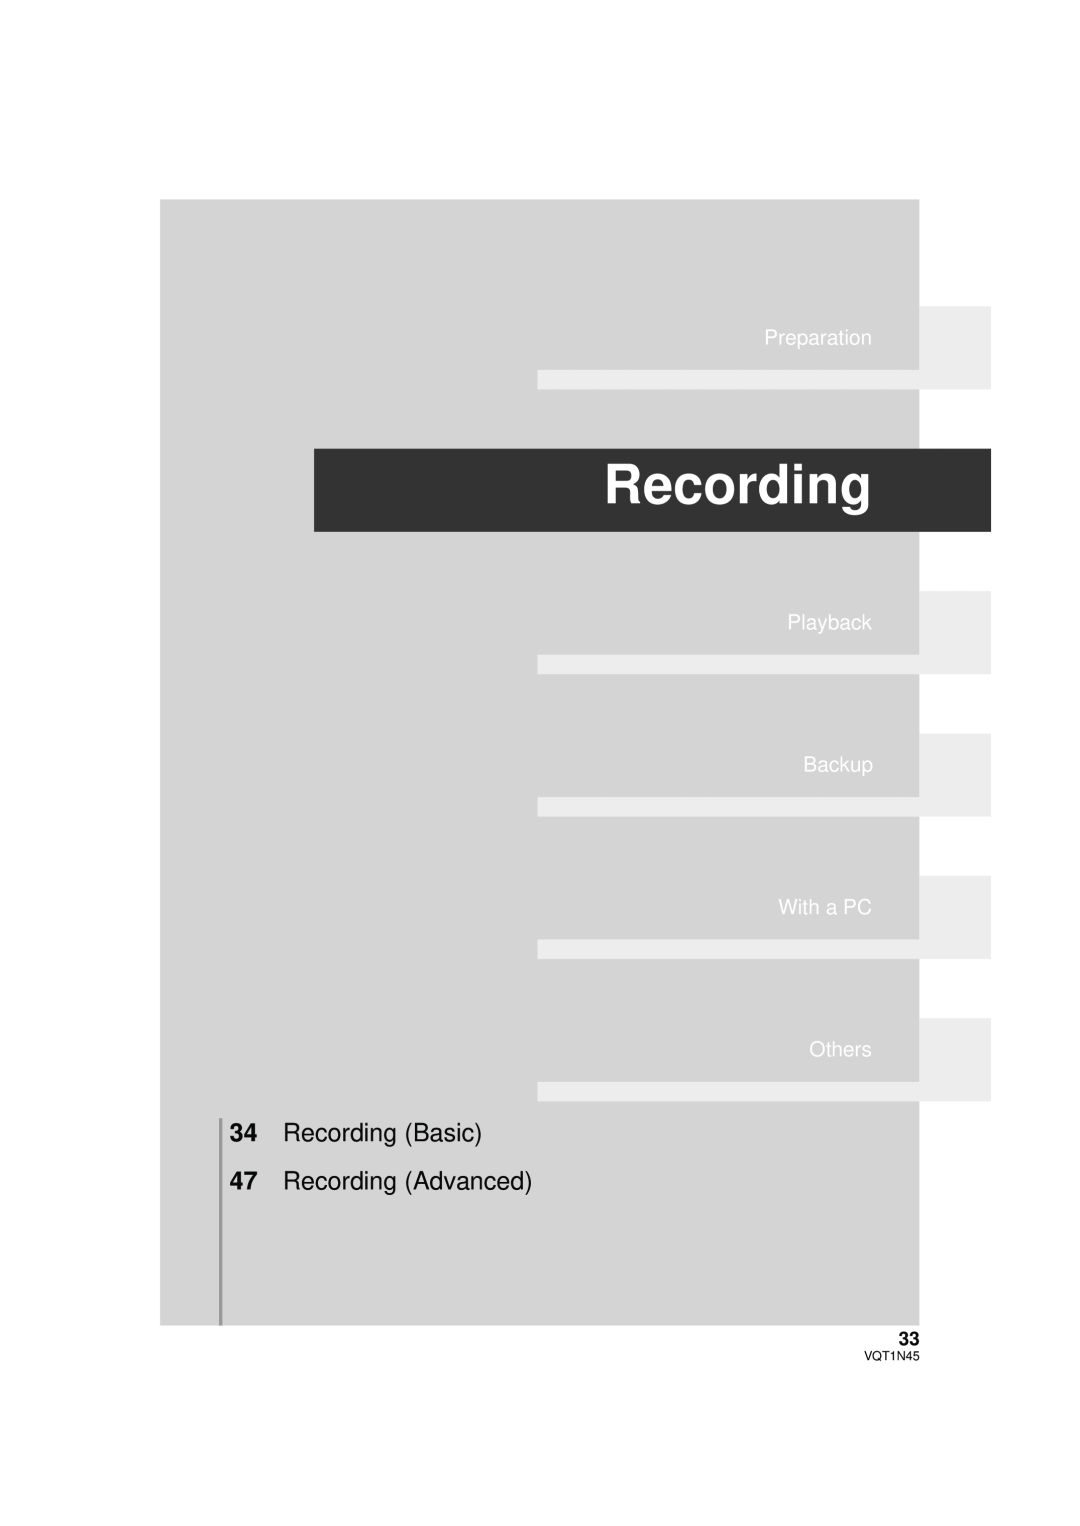 Panasonic HDC-SD9P manual 34Recording Basic 47Recording Advanced, Preparation, Playback Backup With a PC Others, VQT1N45 